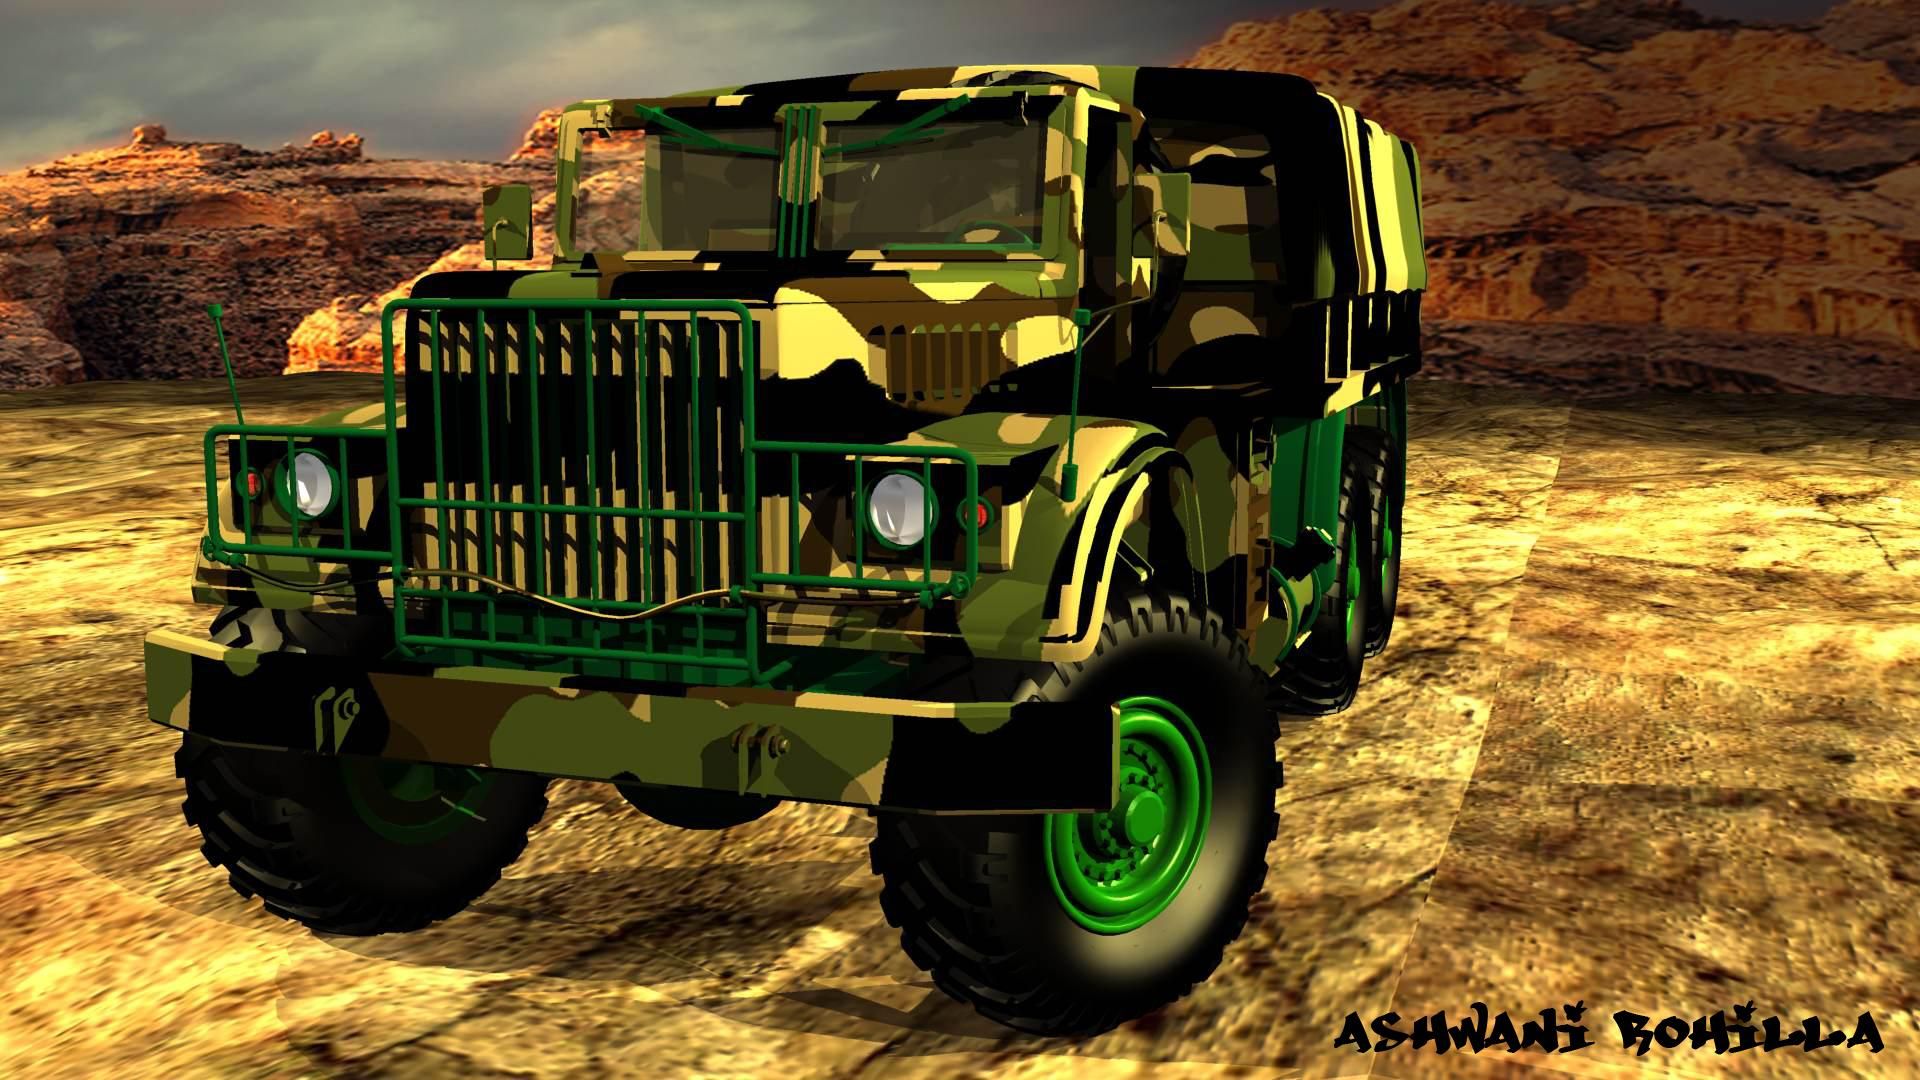 Indian Army Vehicles: Logistics and Engineering. Indian